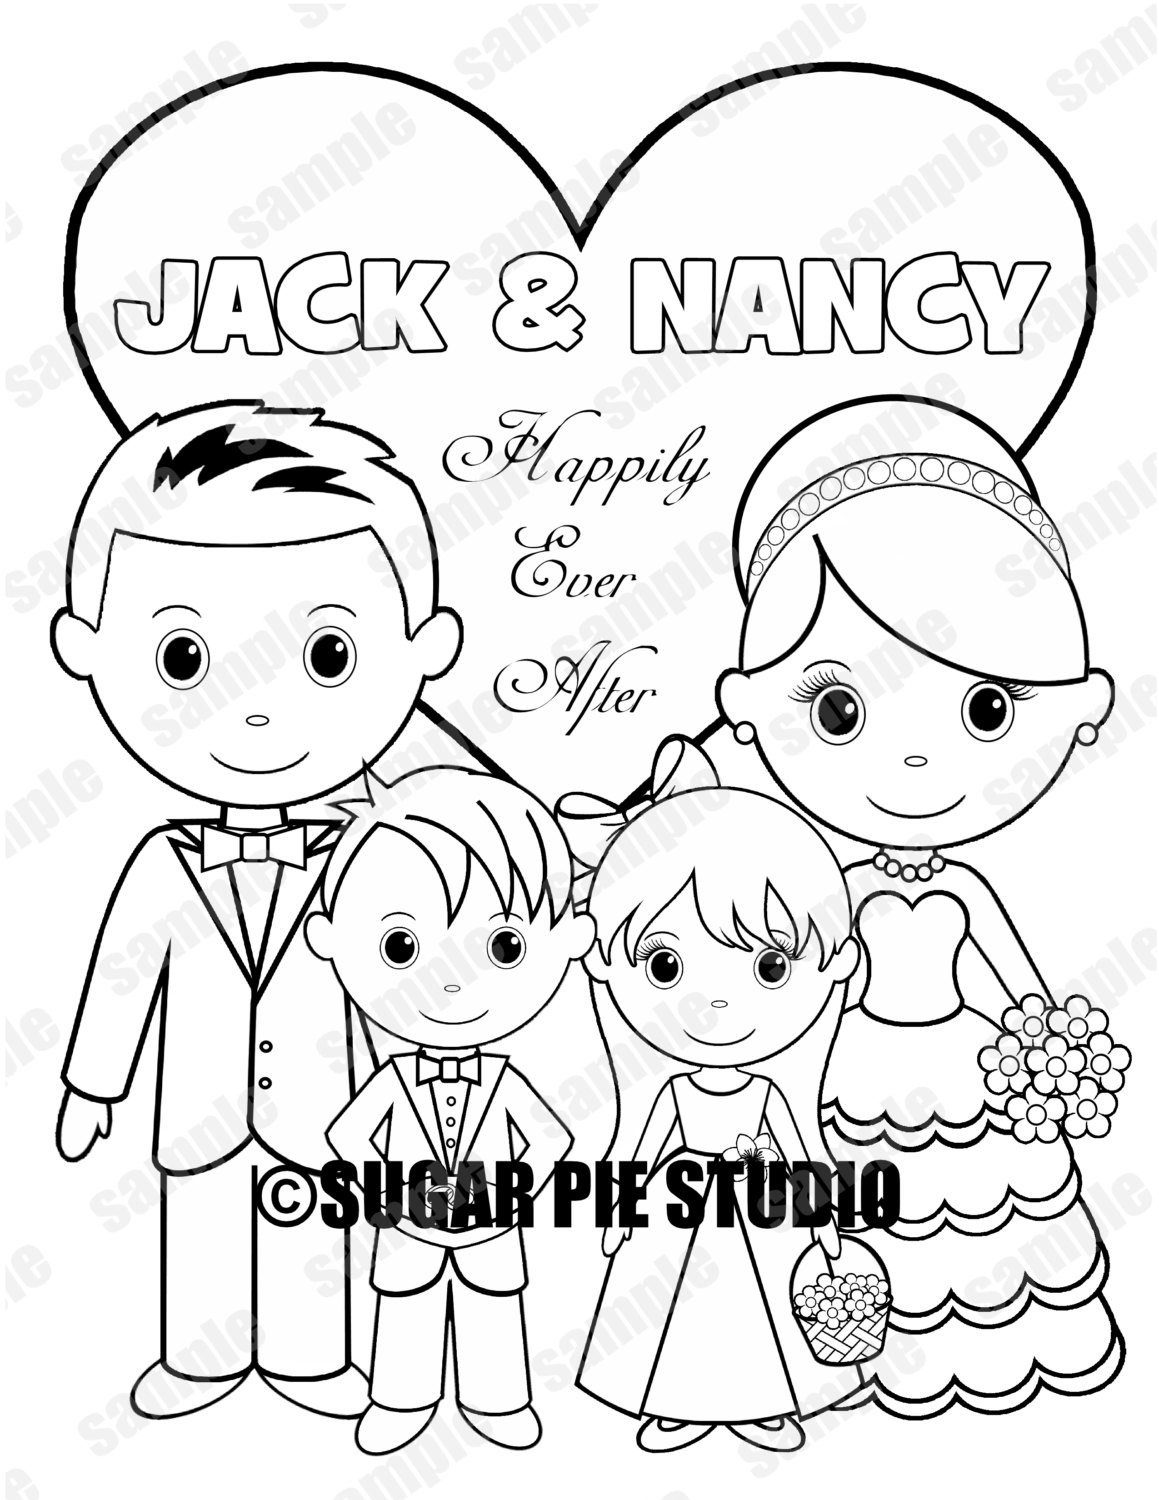 Personalized Flower Girl Coloring Book
 Personalized Printable Bride Groom flower girl ring bearer